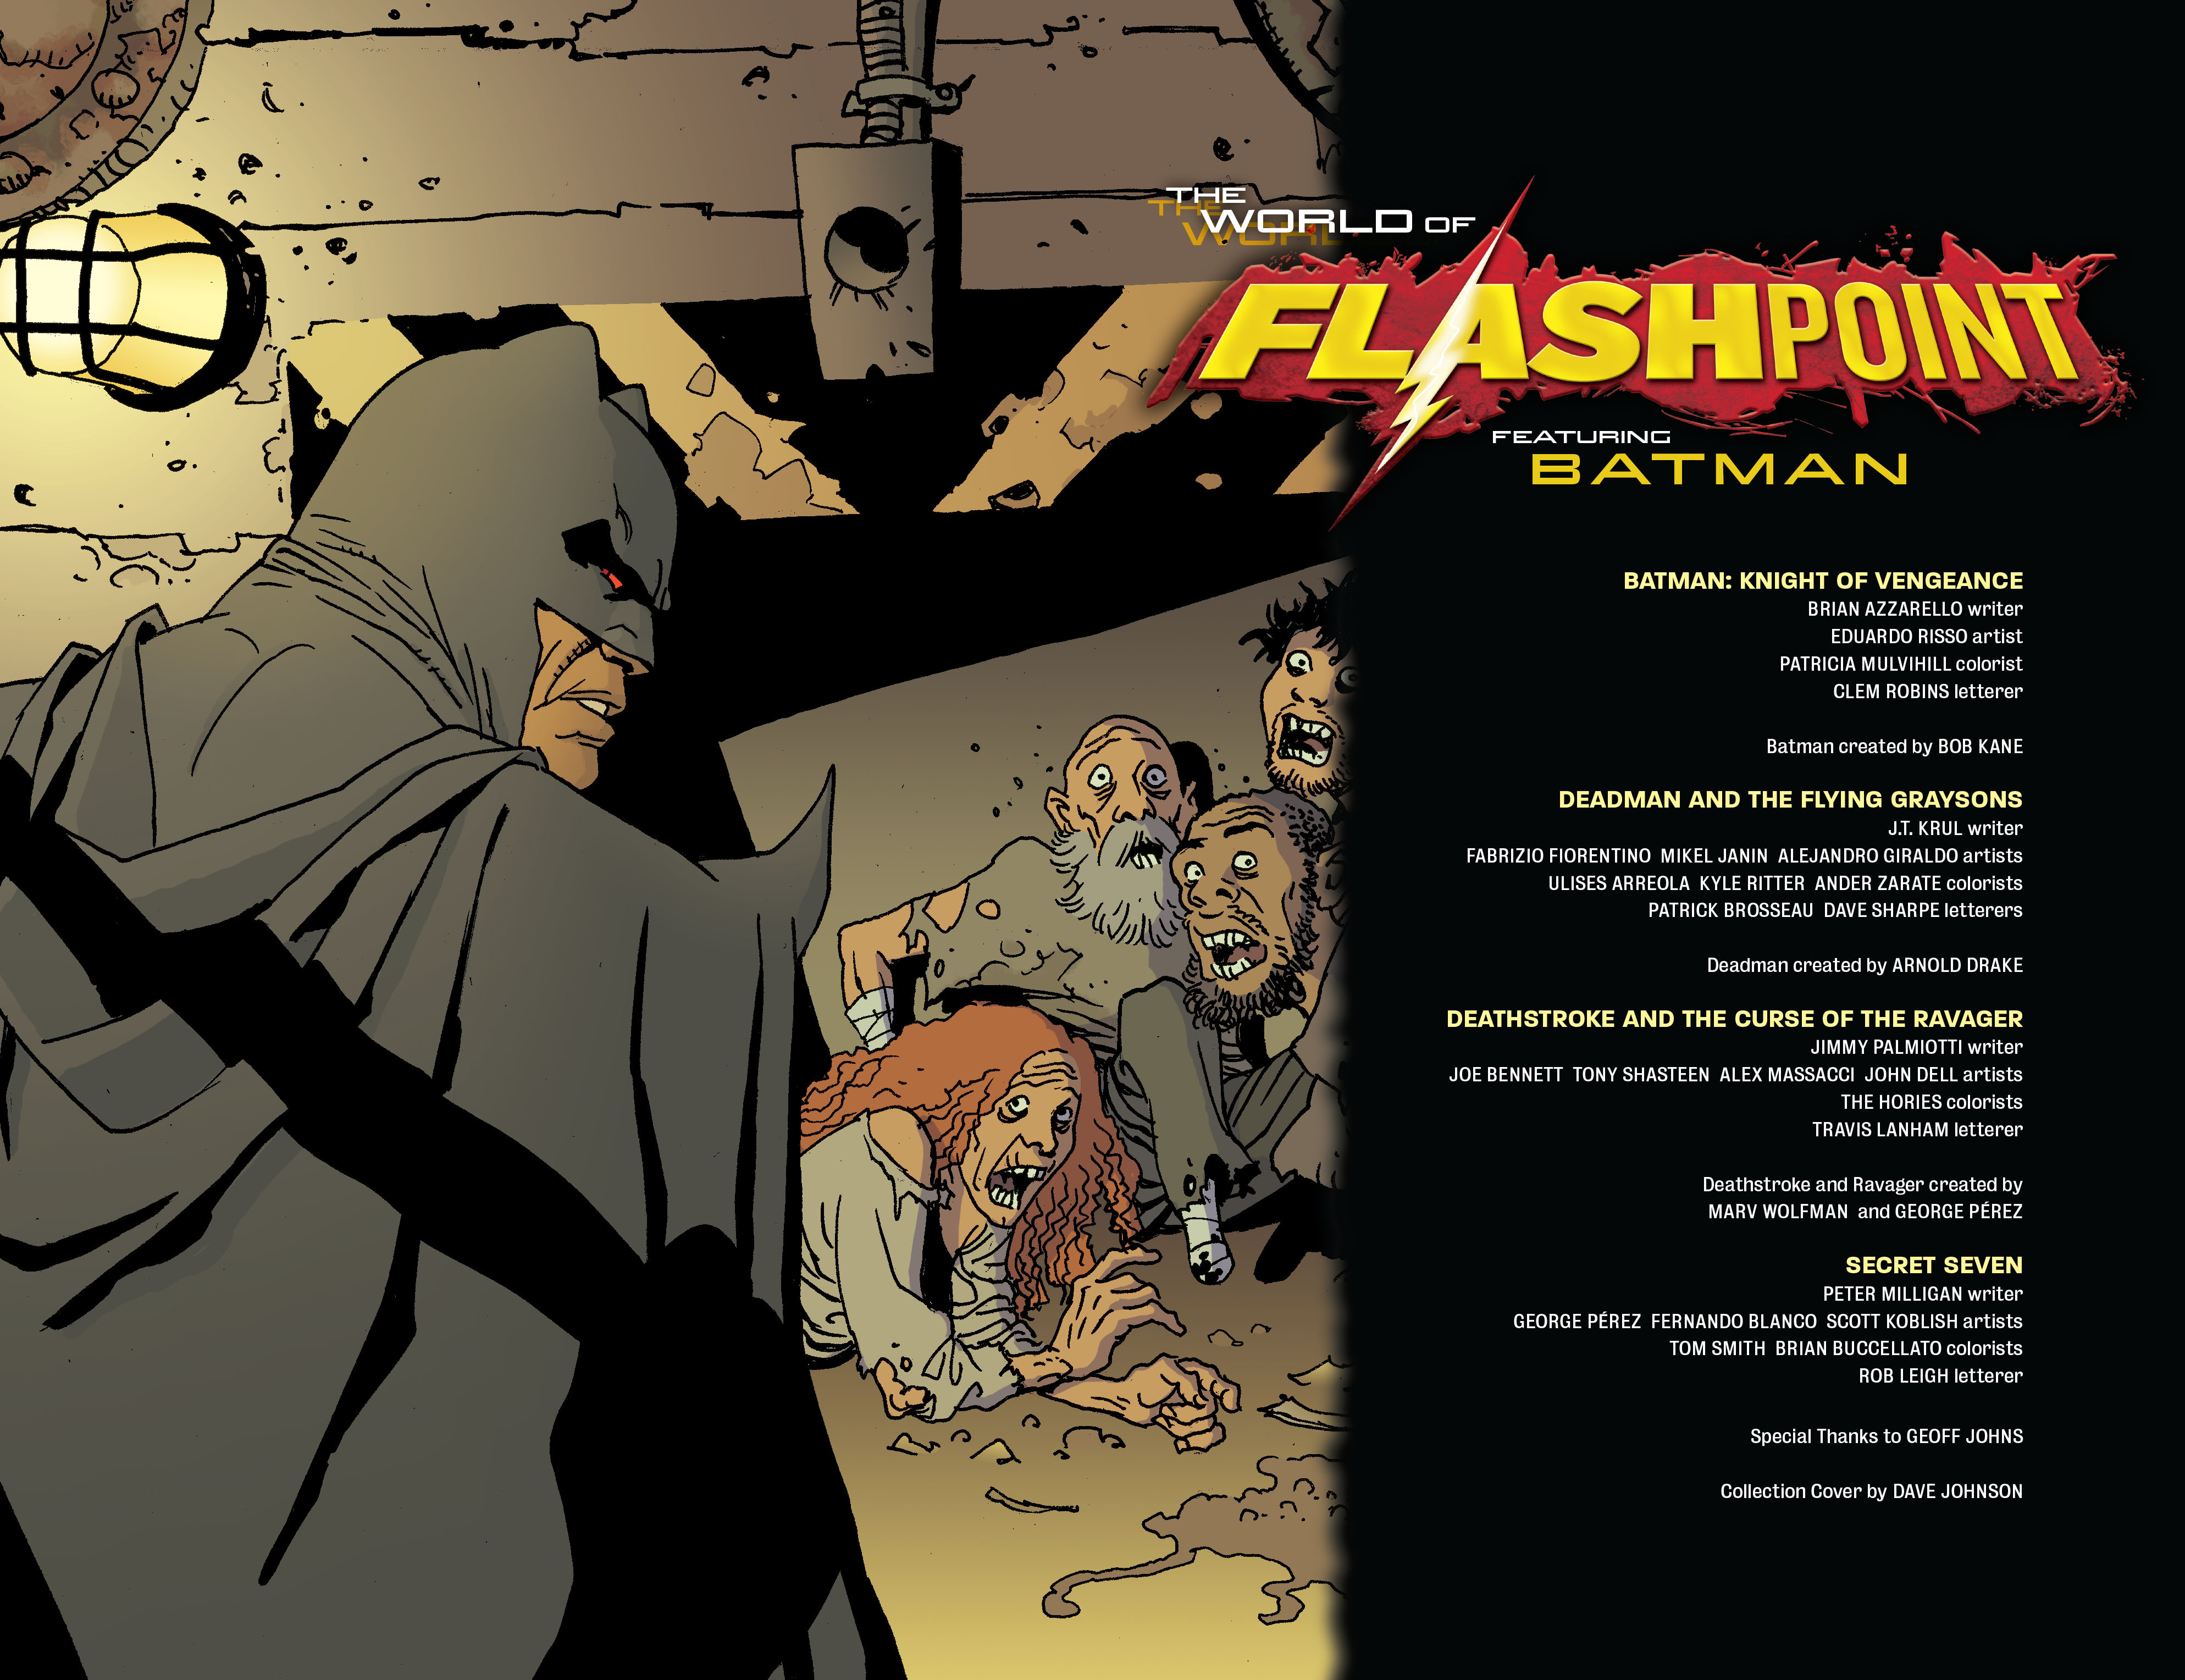 Read online Flashpoint: The World of Flashpoint Featuring Batman comic -  Issue # Full - 3